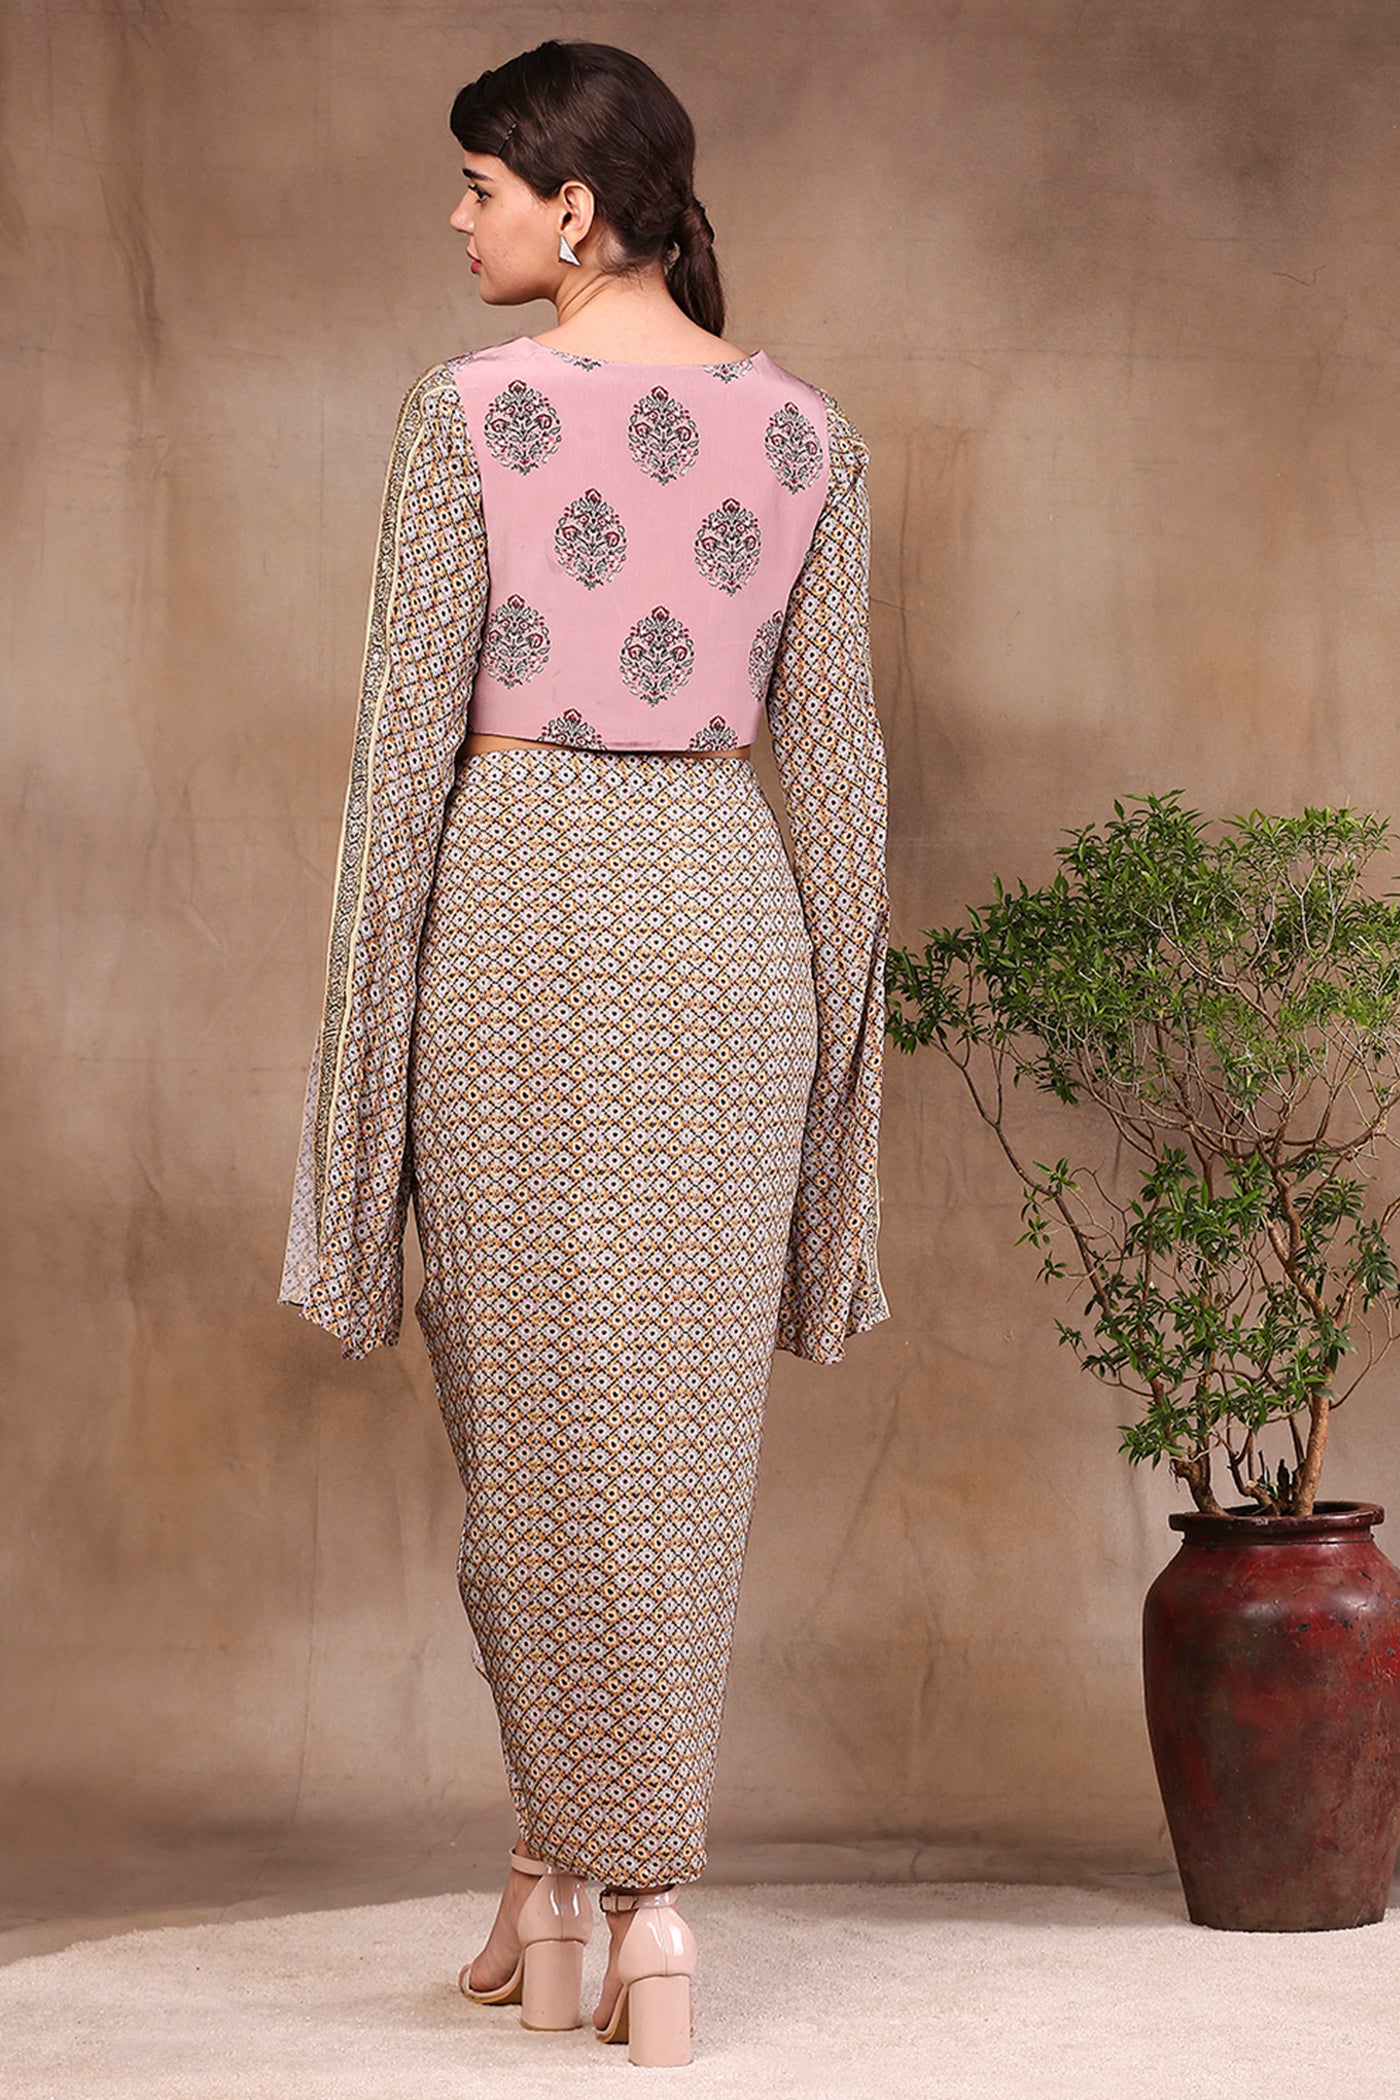 Sougat paul Printed Drape Skirt With Embroidered Top pink fusion indian designer wear online shopping melange singapore